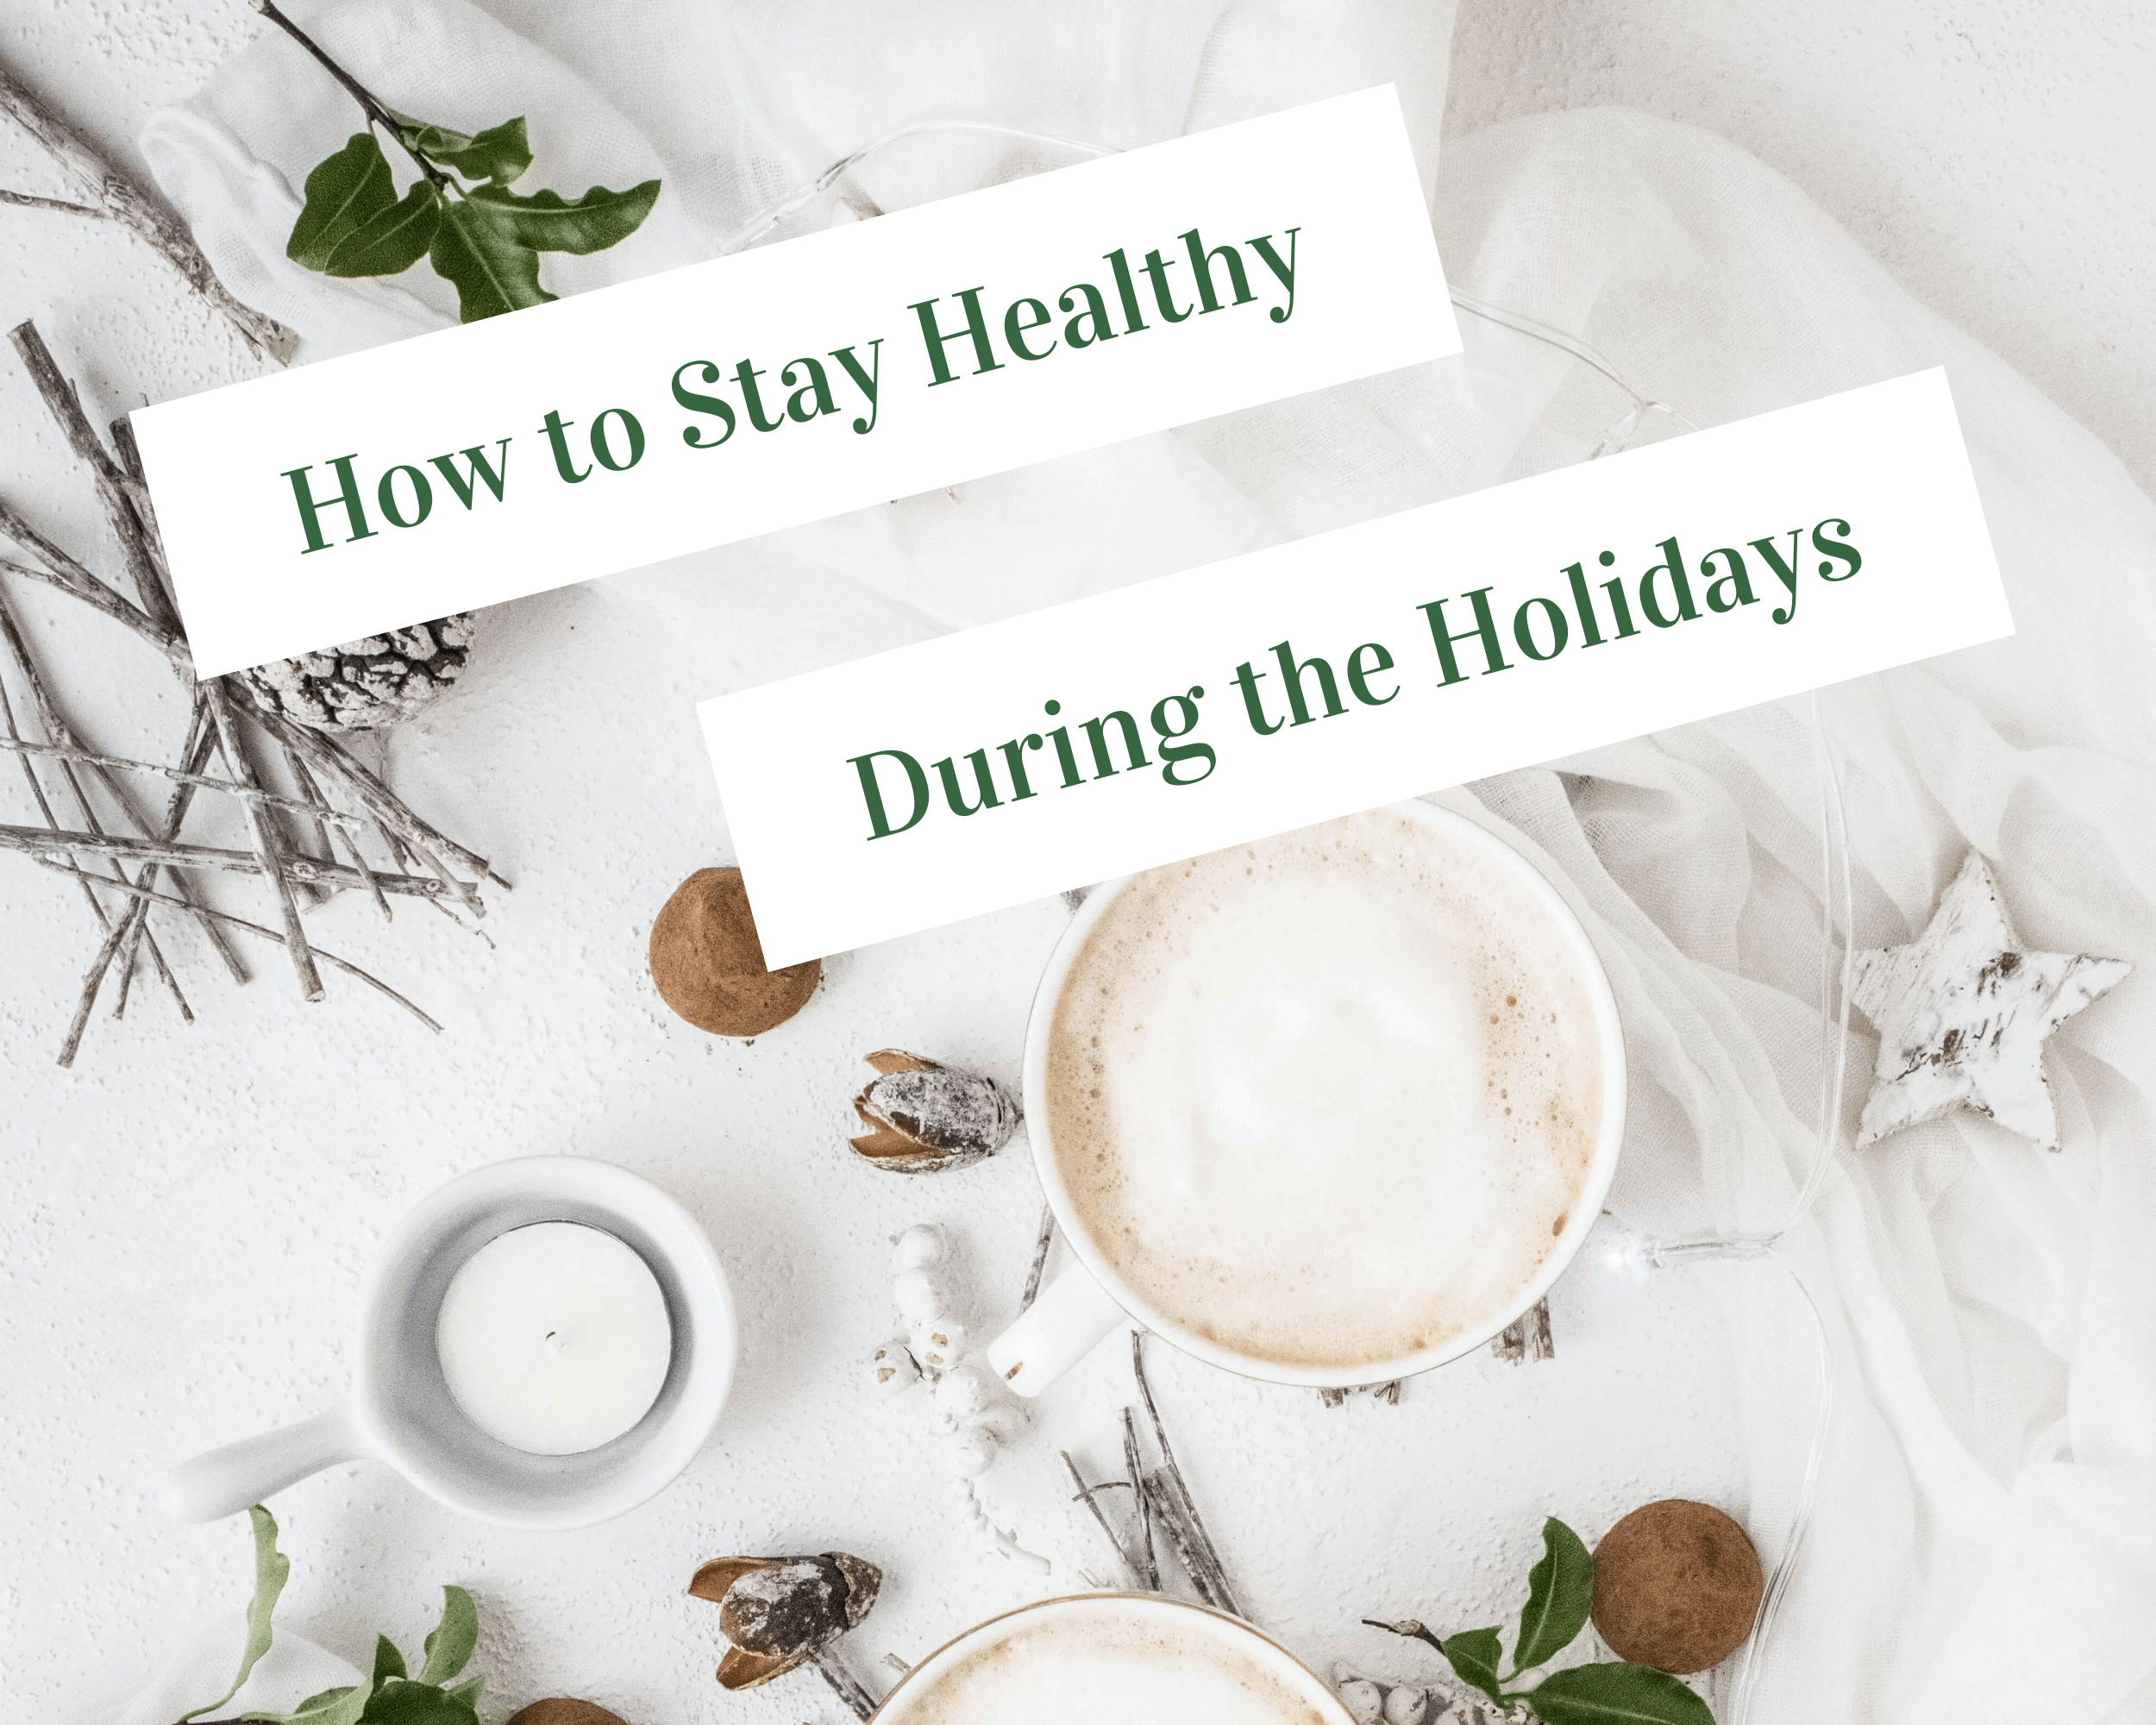 How to stay heathy during the holidays